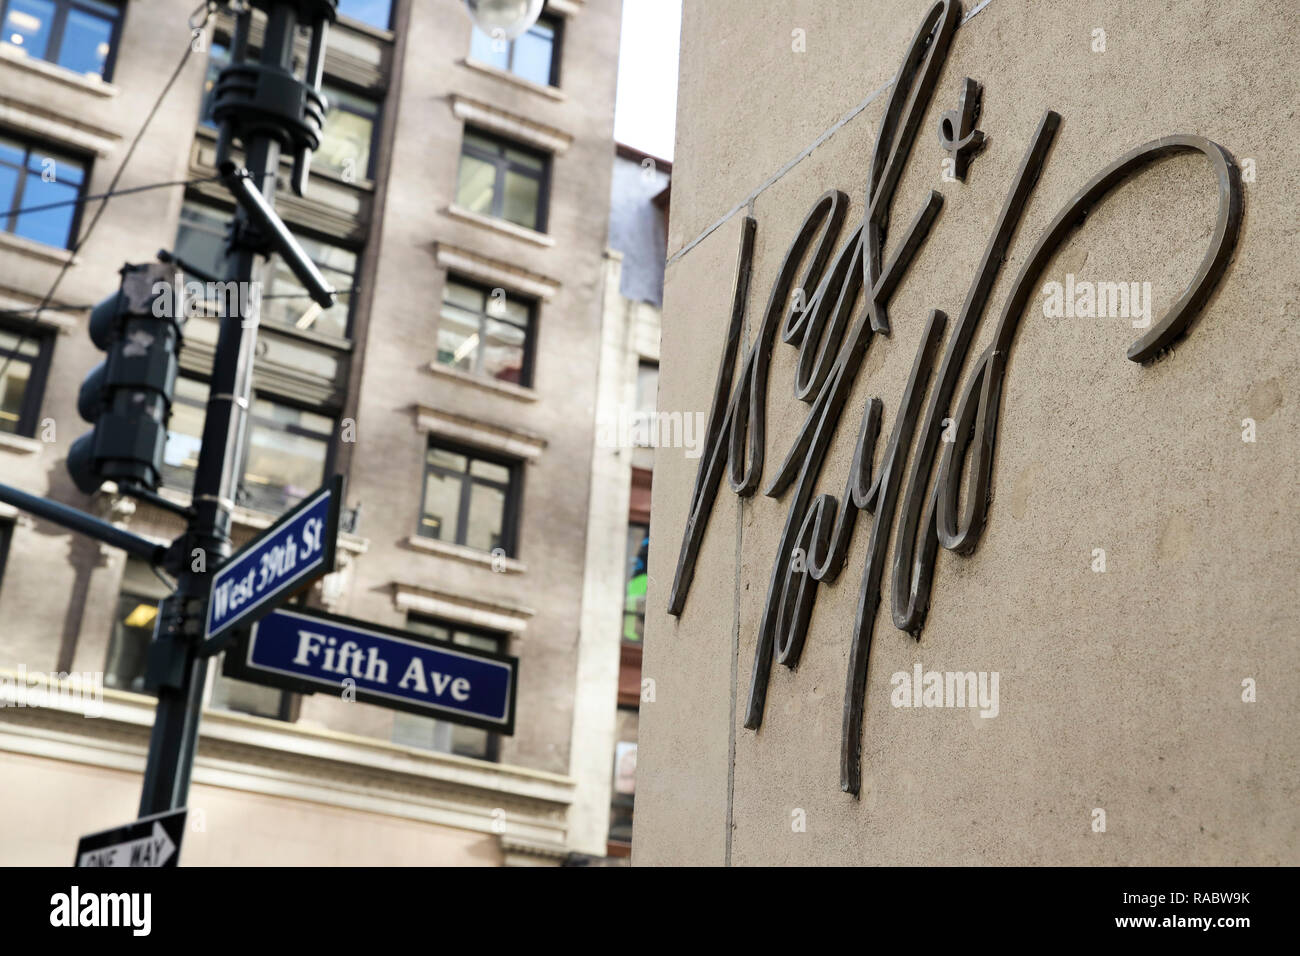 What You Need to Know About Shopping on New York's Famous Fifth Avenue